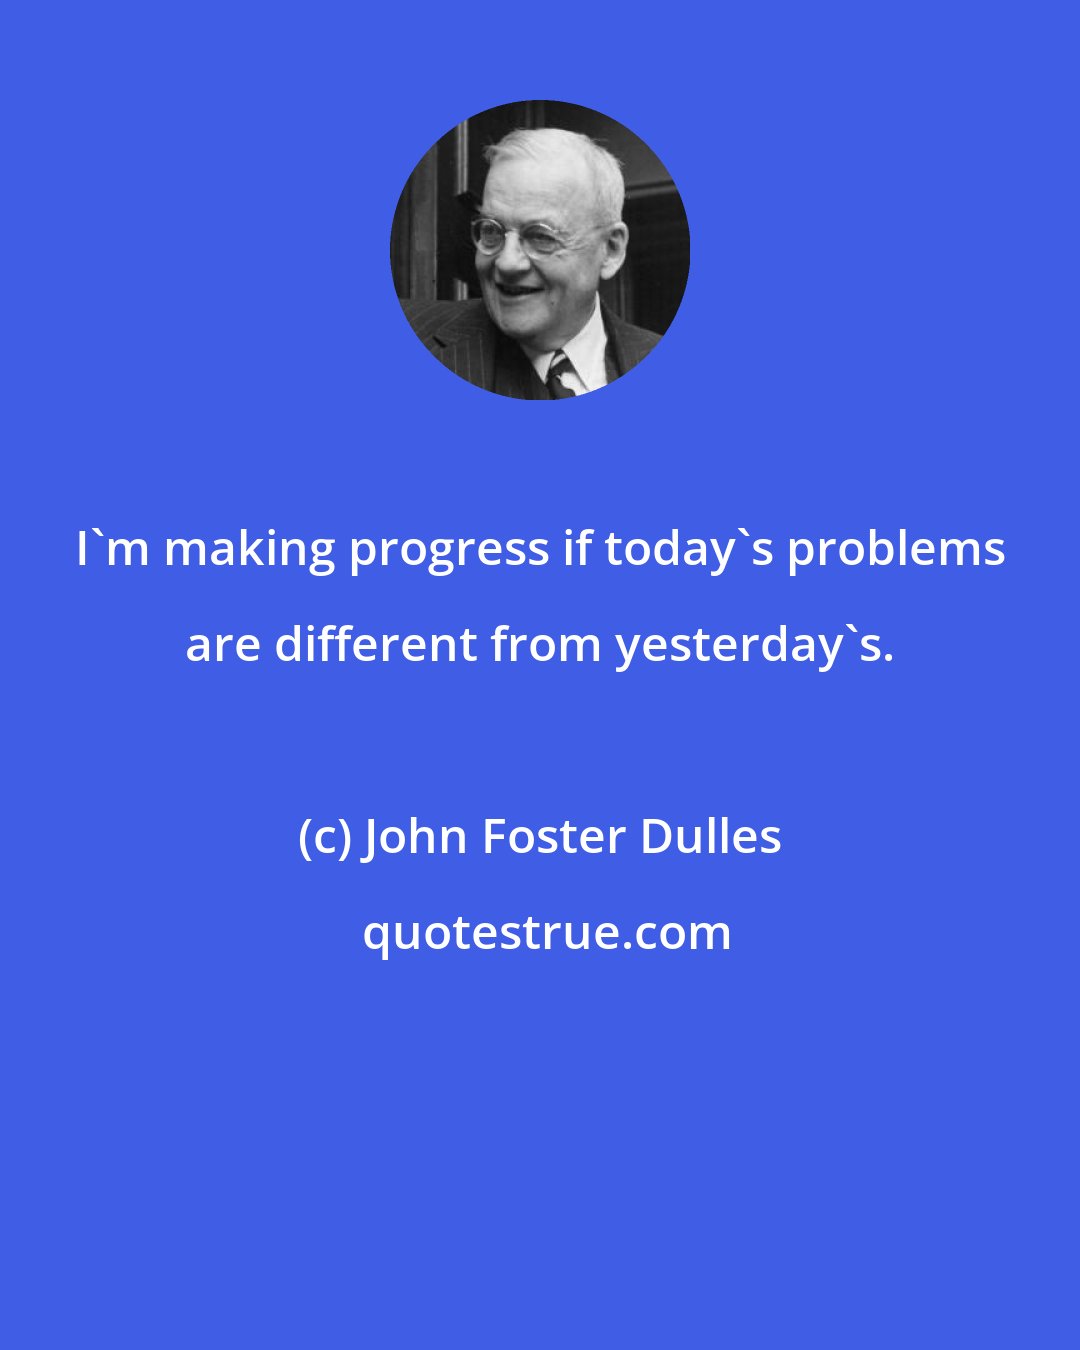 John Foster Dulles: I'm making progress if today's problems are different from yesterday's.